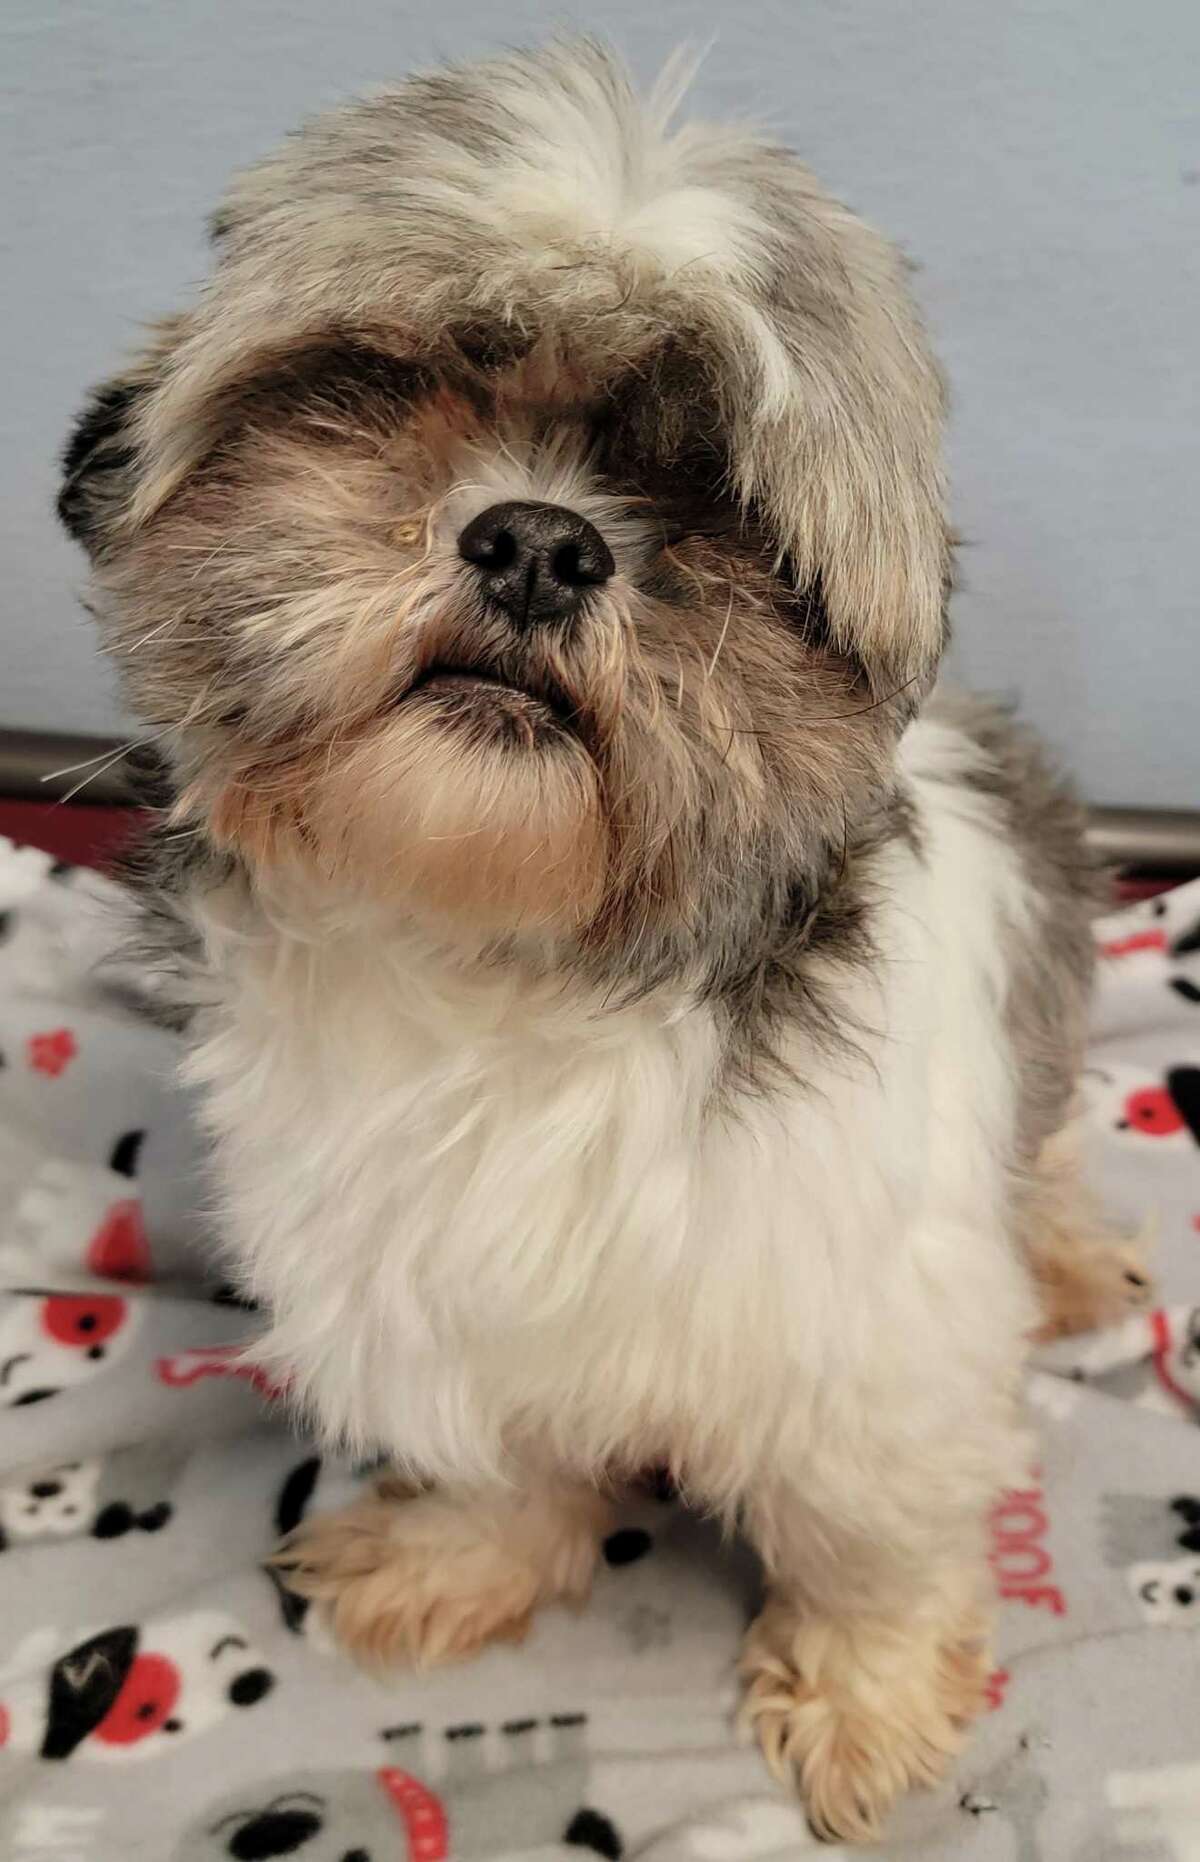 Three-year-old Fella — a cool, calm tricolor Shih Tzu — arrived timidly and disheveled at A New Dawn Pet Adoption, 202 W. San Augustine St., Deer Park, but volunteers say a quick makeover warmed him up. Fella’s fleas and matted hair are gone, and people love him, according to his bio. His adoption contract requires a return to the shelter for final vaccinations and neuter surgery. Learn more at www.facebook.com/anewdawnpetadoption.